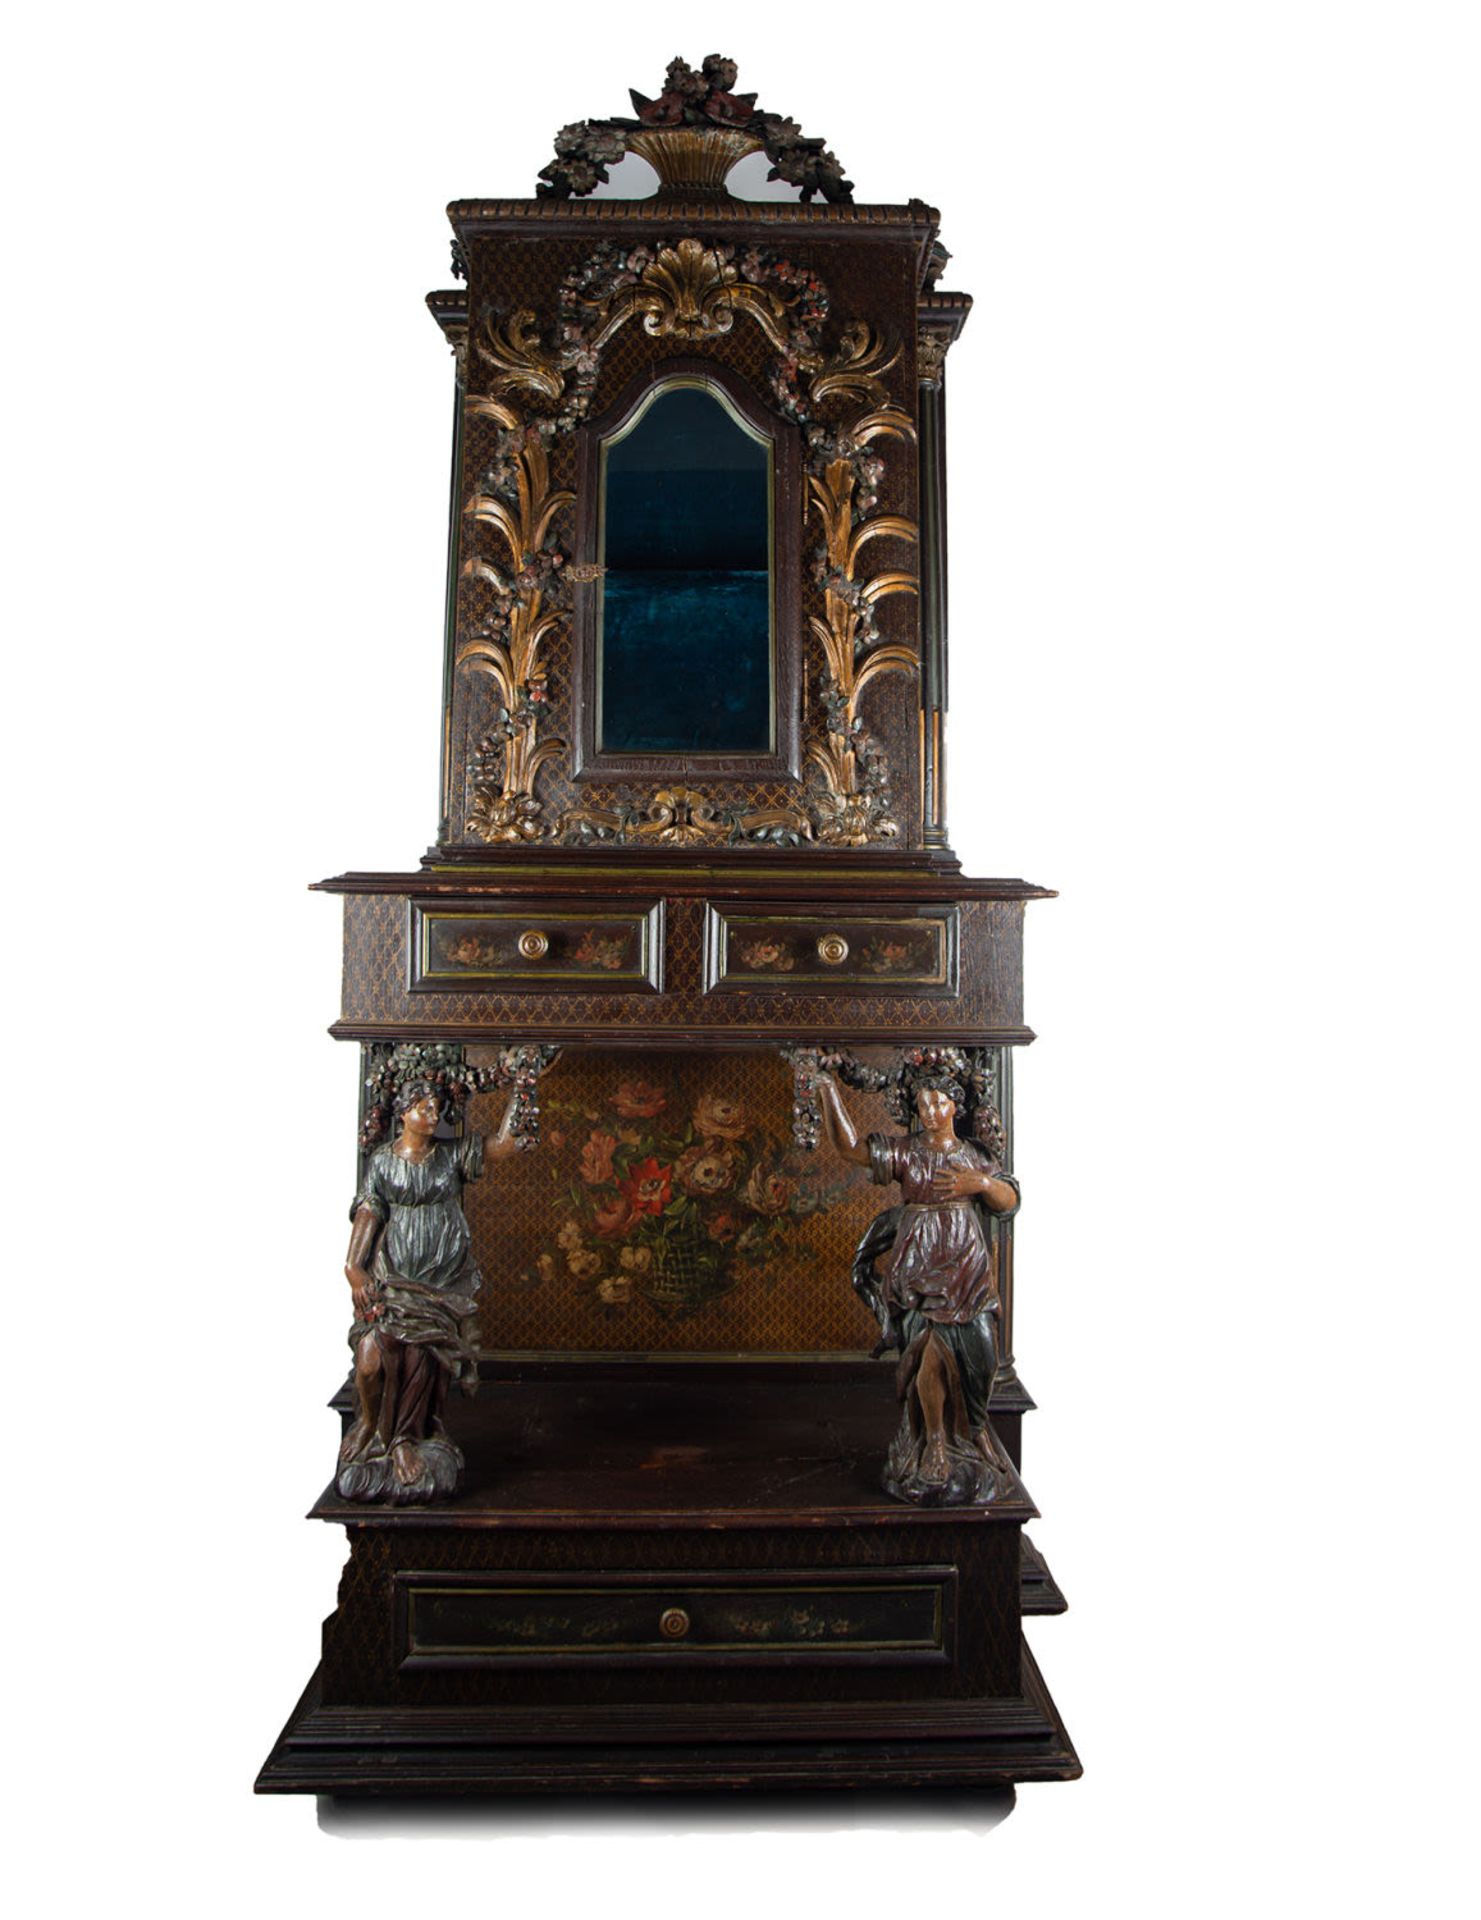 Hand-painted Florentine console cabinet with flower garland motifs topped with a pair of polychrome 